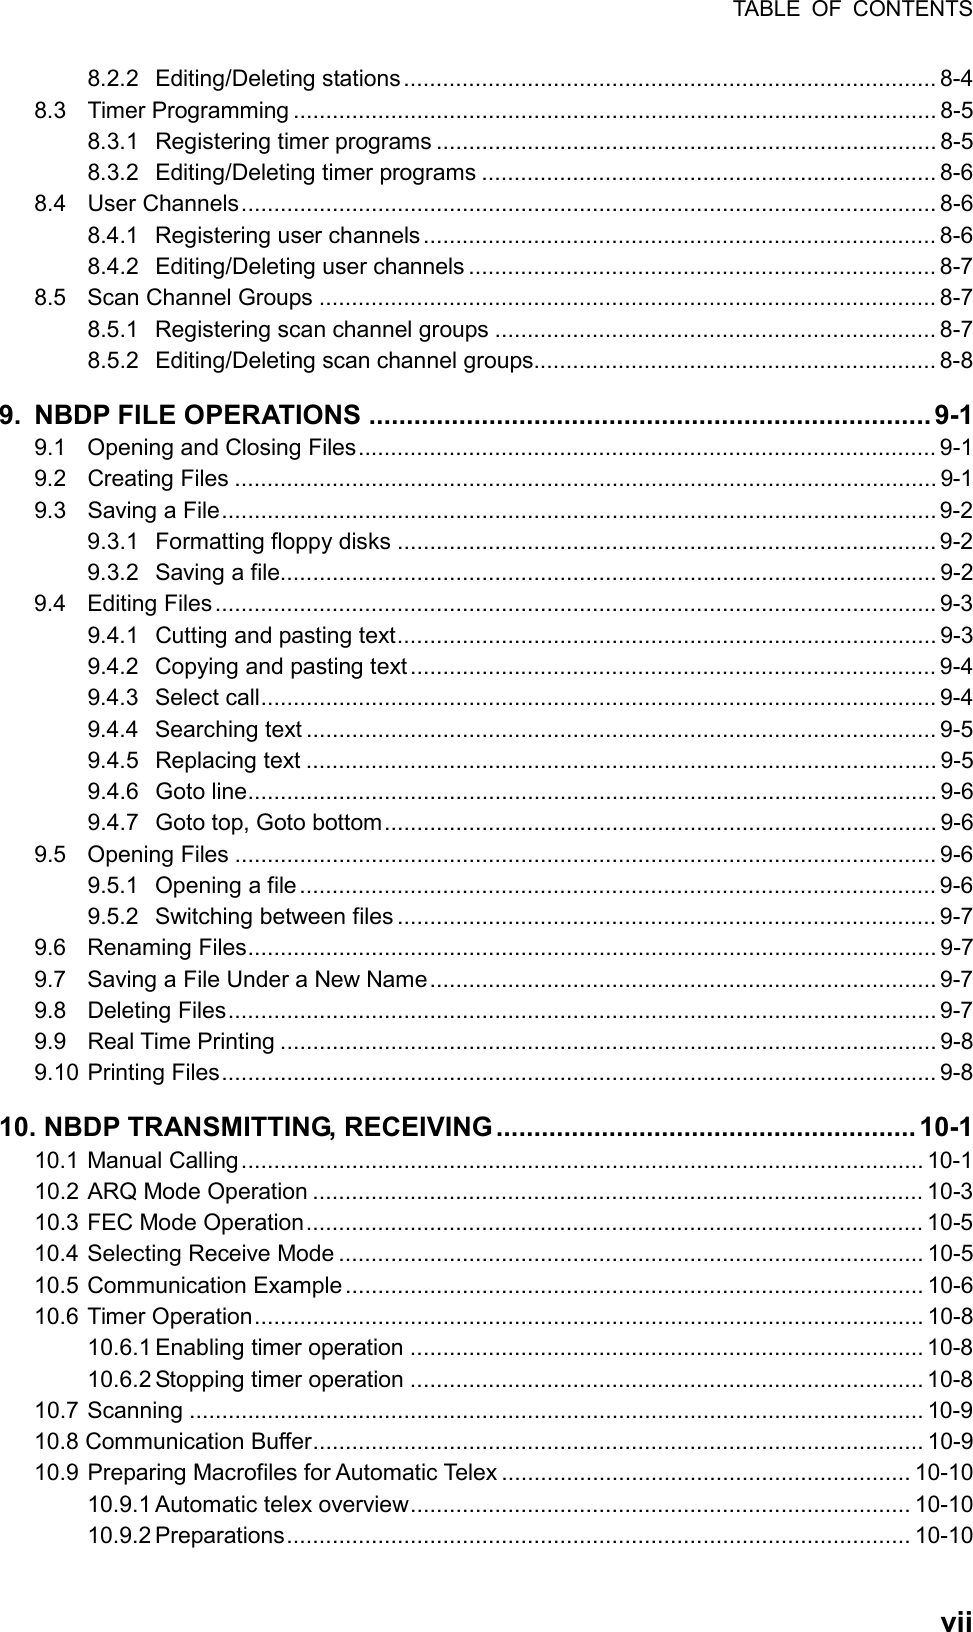 TABLE OF CONTENTS  vii8.2.2 Editing/Deleting stations.................................................................................. 8-4 8.3 Timer Programming ................................................................................................... 8-5 8.3.1  Registering timer programs ............................................................................. 8-5 8.3.2  Editing/Deleting timer programs ...................................................................... 8-6 8.4 User Channels........................................................................................................... 8-6 8.4.1 Registering user channels ............................................................................... 8-6 8.4.2 Editing/Deleting user channels ........................................................................ 8-7 8.5 Scan Channel Groups ............................................................................................... 8-7 8.5.1 Registering scan channel groups .................................................................... 8-7 8.5.2 Editing/Deleting scan channel groups.............................................................. 8-8 9.  NBDP FILE OPERATIONS ........................................................................... 9-1 9.1  Opening and Closing Files......................................................................................... 9-1 9.2 Creating Files ............................................................................................................ 9-1 9.3  Saving a File.............................................................................................................. 9-2 9.3.1 Formatting floppy disks ................................................................................... 9-2 9.3.2 Saving a file..................................................................................................... 9-2 9.4 Editing Files...............................................................................................................9-3 9.4.1  Cutting and pasting text................................................................................... 9-3 9.4.2  Copying and pasting text................................................................................. 9-4 9.4.3 Select call........................................................................................................ 9-4 9.4.4 Searching text ................................................................................................. 9-5 9.4.5 Replacing text ................................................................................................. 9-5 9.4.6 Goto line.......................................................................................................... 9-6 9.4.7  Goto top, Goto bottom..................................................................................... 9-6 9.5 Opening Files ............................................................................................................ 9-6 9.5.1 Opening a file .................................................................................................. 9-6 9.5.2 Switching between files ................................................................................... 9-7 9.6 Renaming Files.......................................................................................................... 9-7 9.7  Saving a File Under a New Name.............................................................................. 9-7 9.8 Deleting Files............................................................................................................. 9-7 9.9 Real Time Printing ..................................................................................................... 9-8 9.10 Printing Files.............................................................................................................. 9-8 10. NBDP TRANSMITTING, RECEIVING ........................................................ 10-1 10.1 Manual Calling......................................................................................................... 10-1 10.2 ARQ Mode Operation .............................................................................................. 10-3 10.3 FEC Mode Operation............................................................................................... 10-5 10.4 Selecting Receive Mode .......................................................................................... 10-5 10.5 Communication Example ......................................................................................... 10-6 10.6 Timer Operation....................................................................................................... 10-8 10.6.1 Enabling  timer operation ............................................................................... 10-8 10.6.2 Stopping timer operation ............................................................................... 10-8 10.7 Scanning ................................................................................................................. 10-9 10.8 Communication Buffer.............................................................................................. 10-9 10.9 Preparing Macrofiles for Automatic Telex ............................................................... 10-10 10.9.1 Automatic telex overview............................................................................. 10-10 10.9.2 Preparations................................................................................................ 10-10 